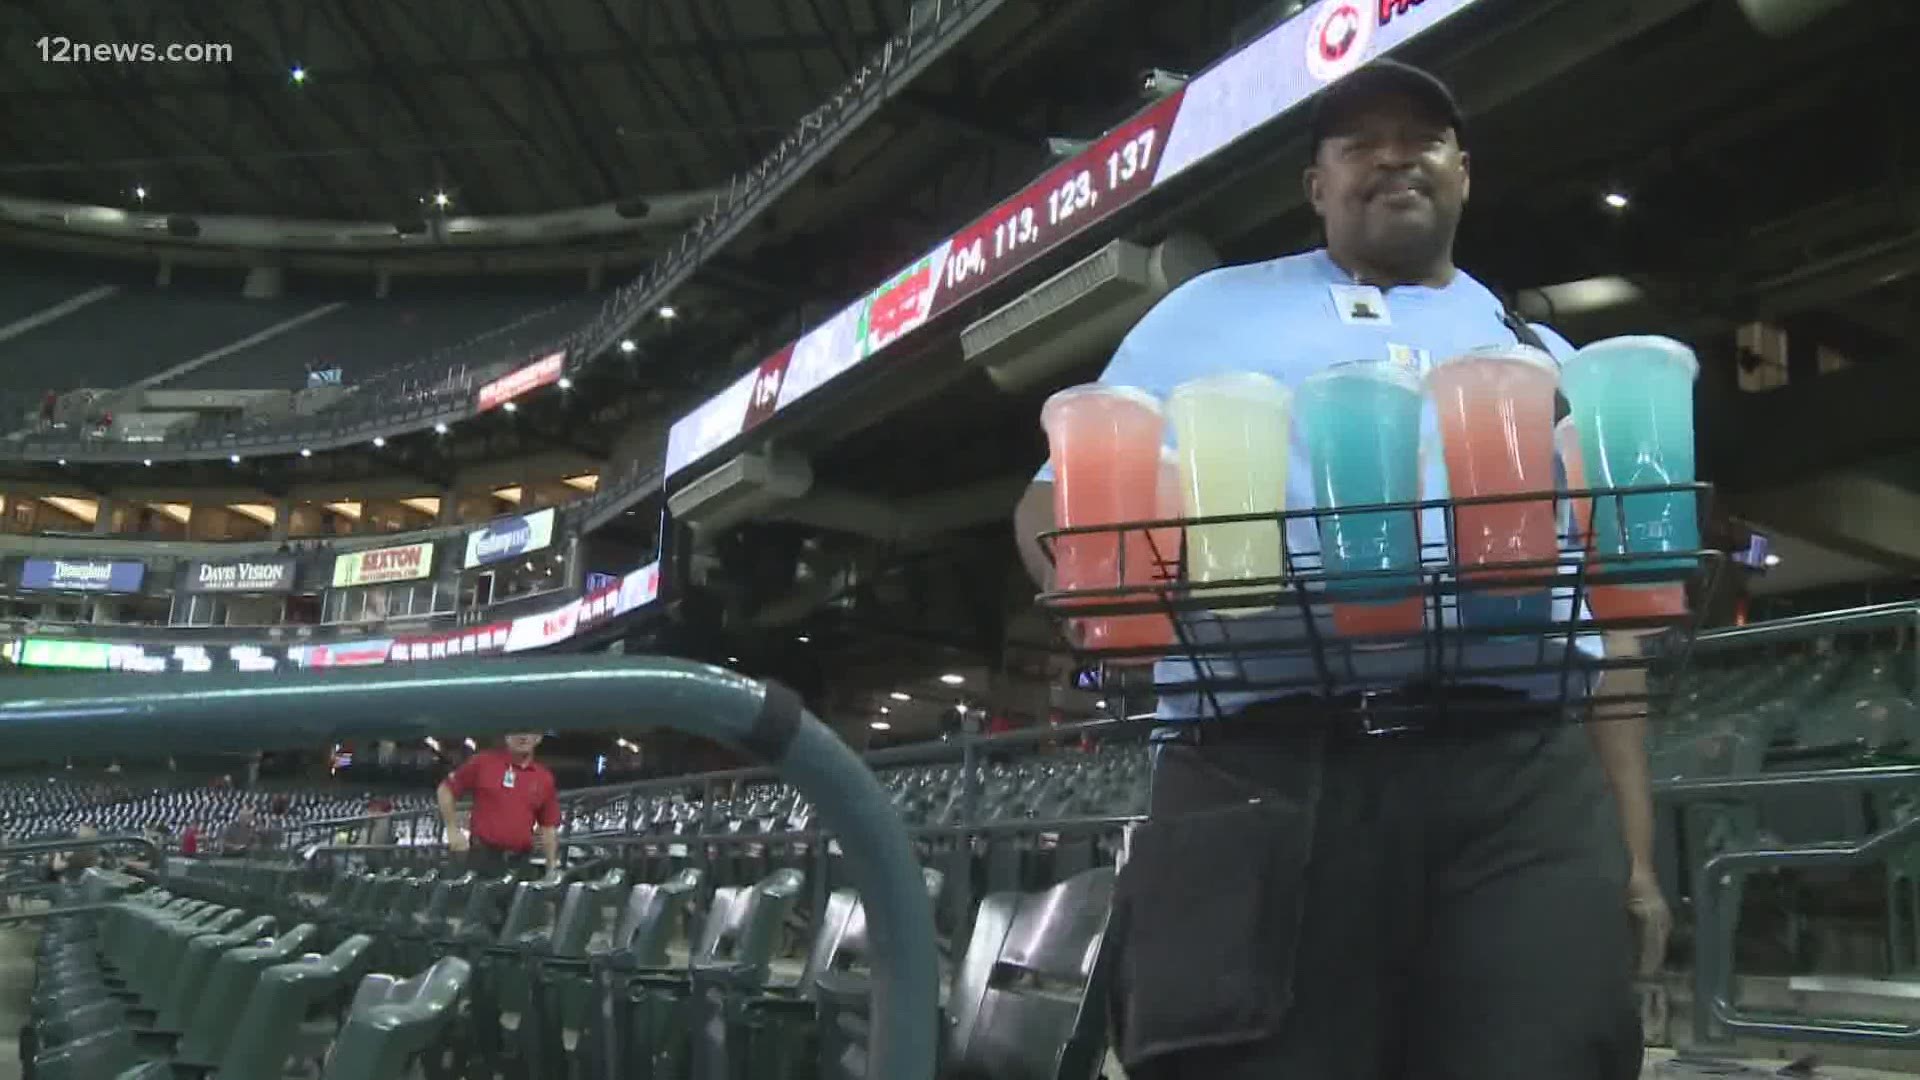 The D-Backs are trying to make Opening Day as normal as possible. But it won't be Opening Day without one the "lemonade guy".